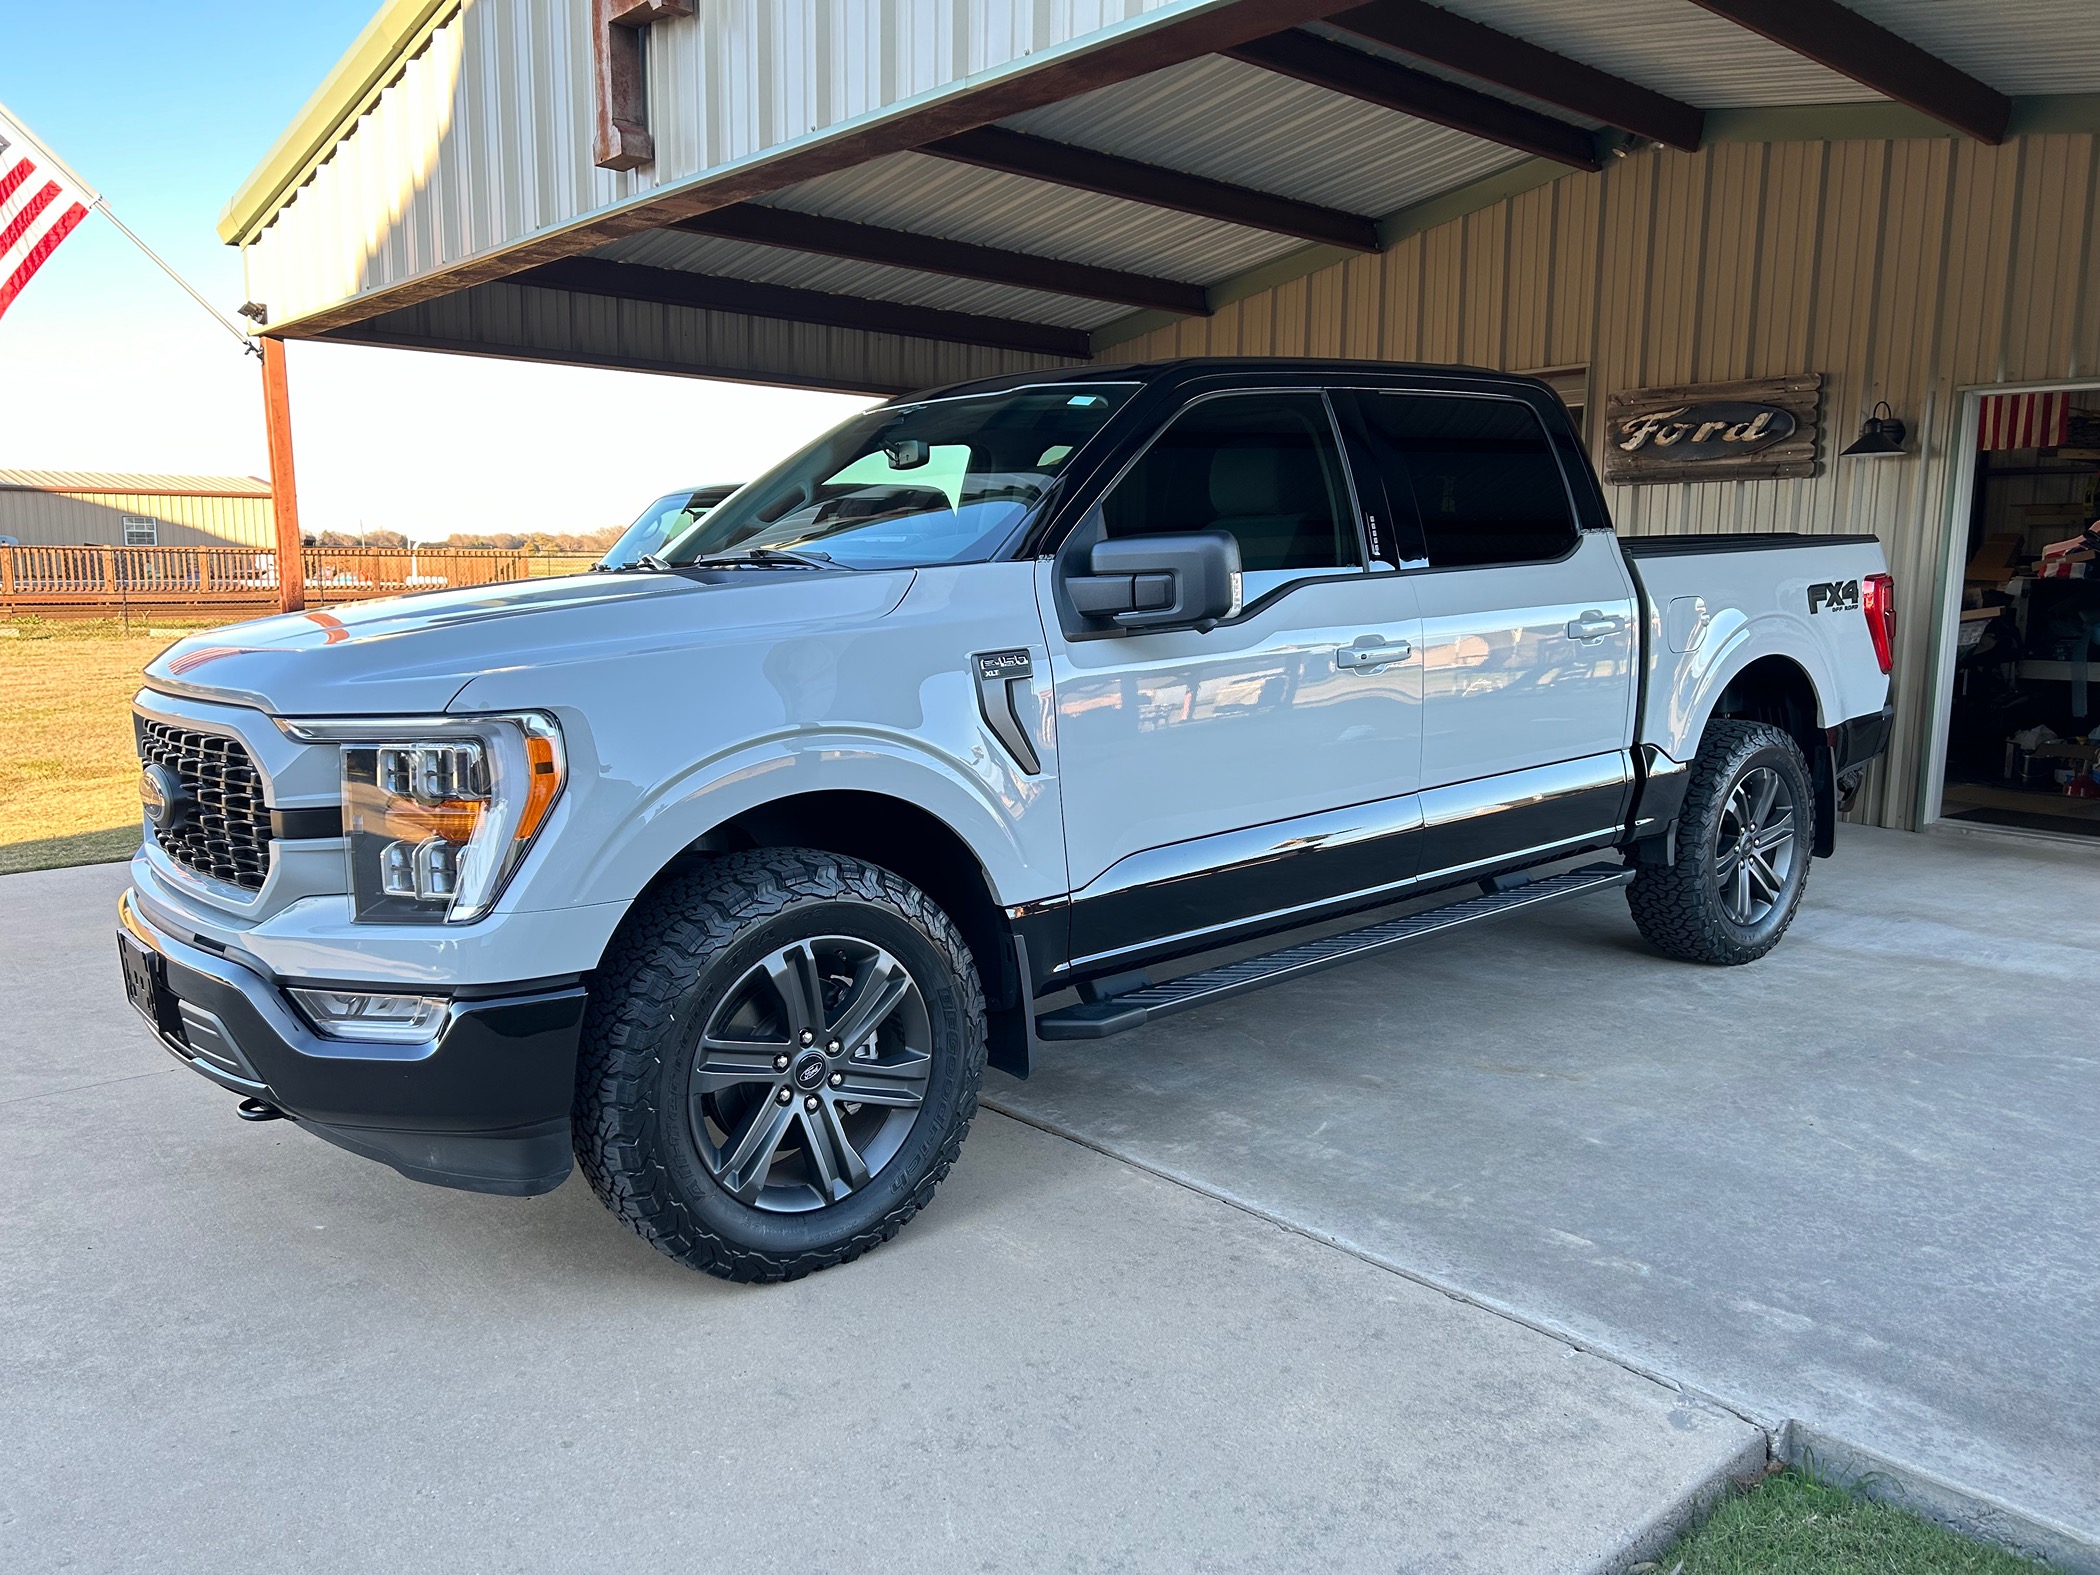 Ford F-150 Random F-150 Photos of the Day - Post Yours! 📸 🤳 IMG_0808